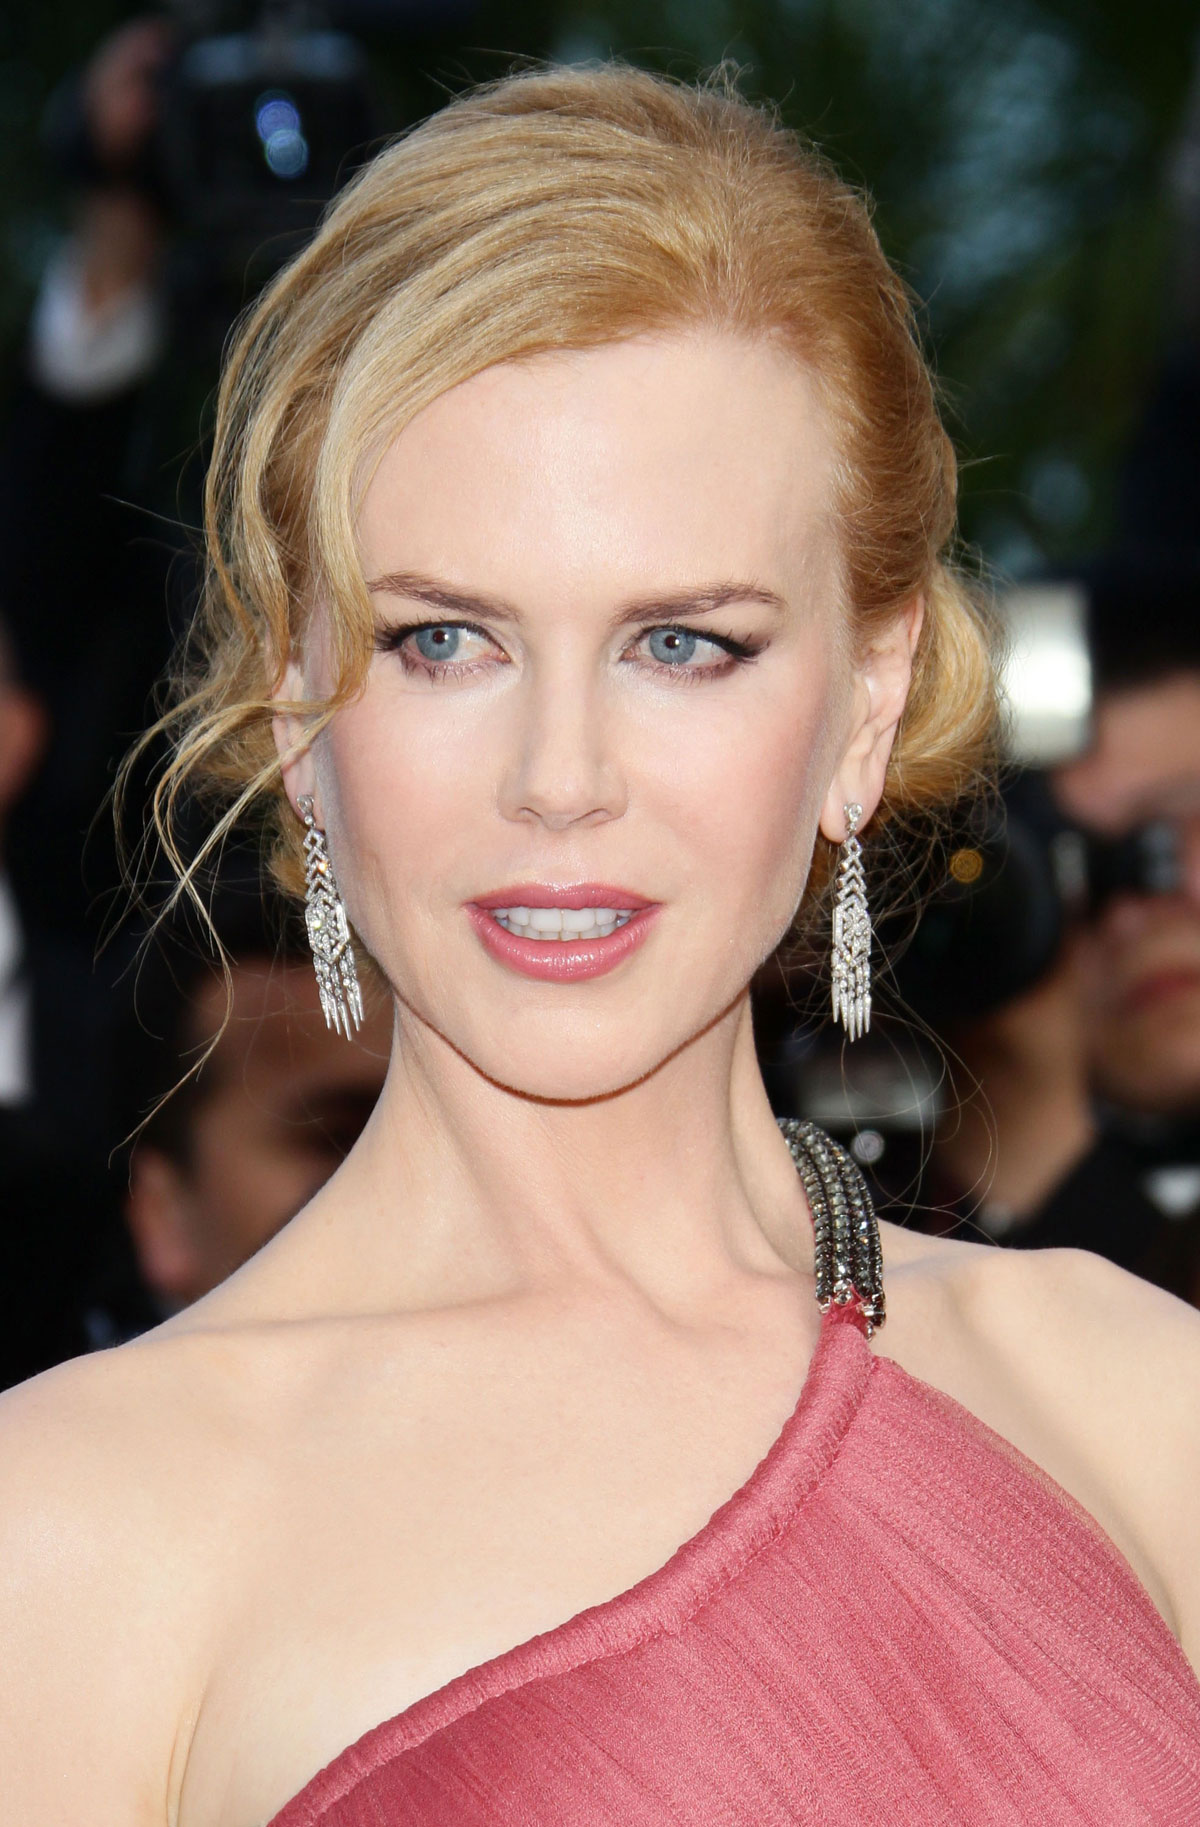 NICOLE KIDMAN At The Paperboy Premiere At 65th Annual Cannes Film Festival 13 